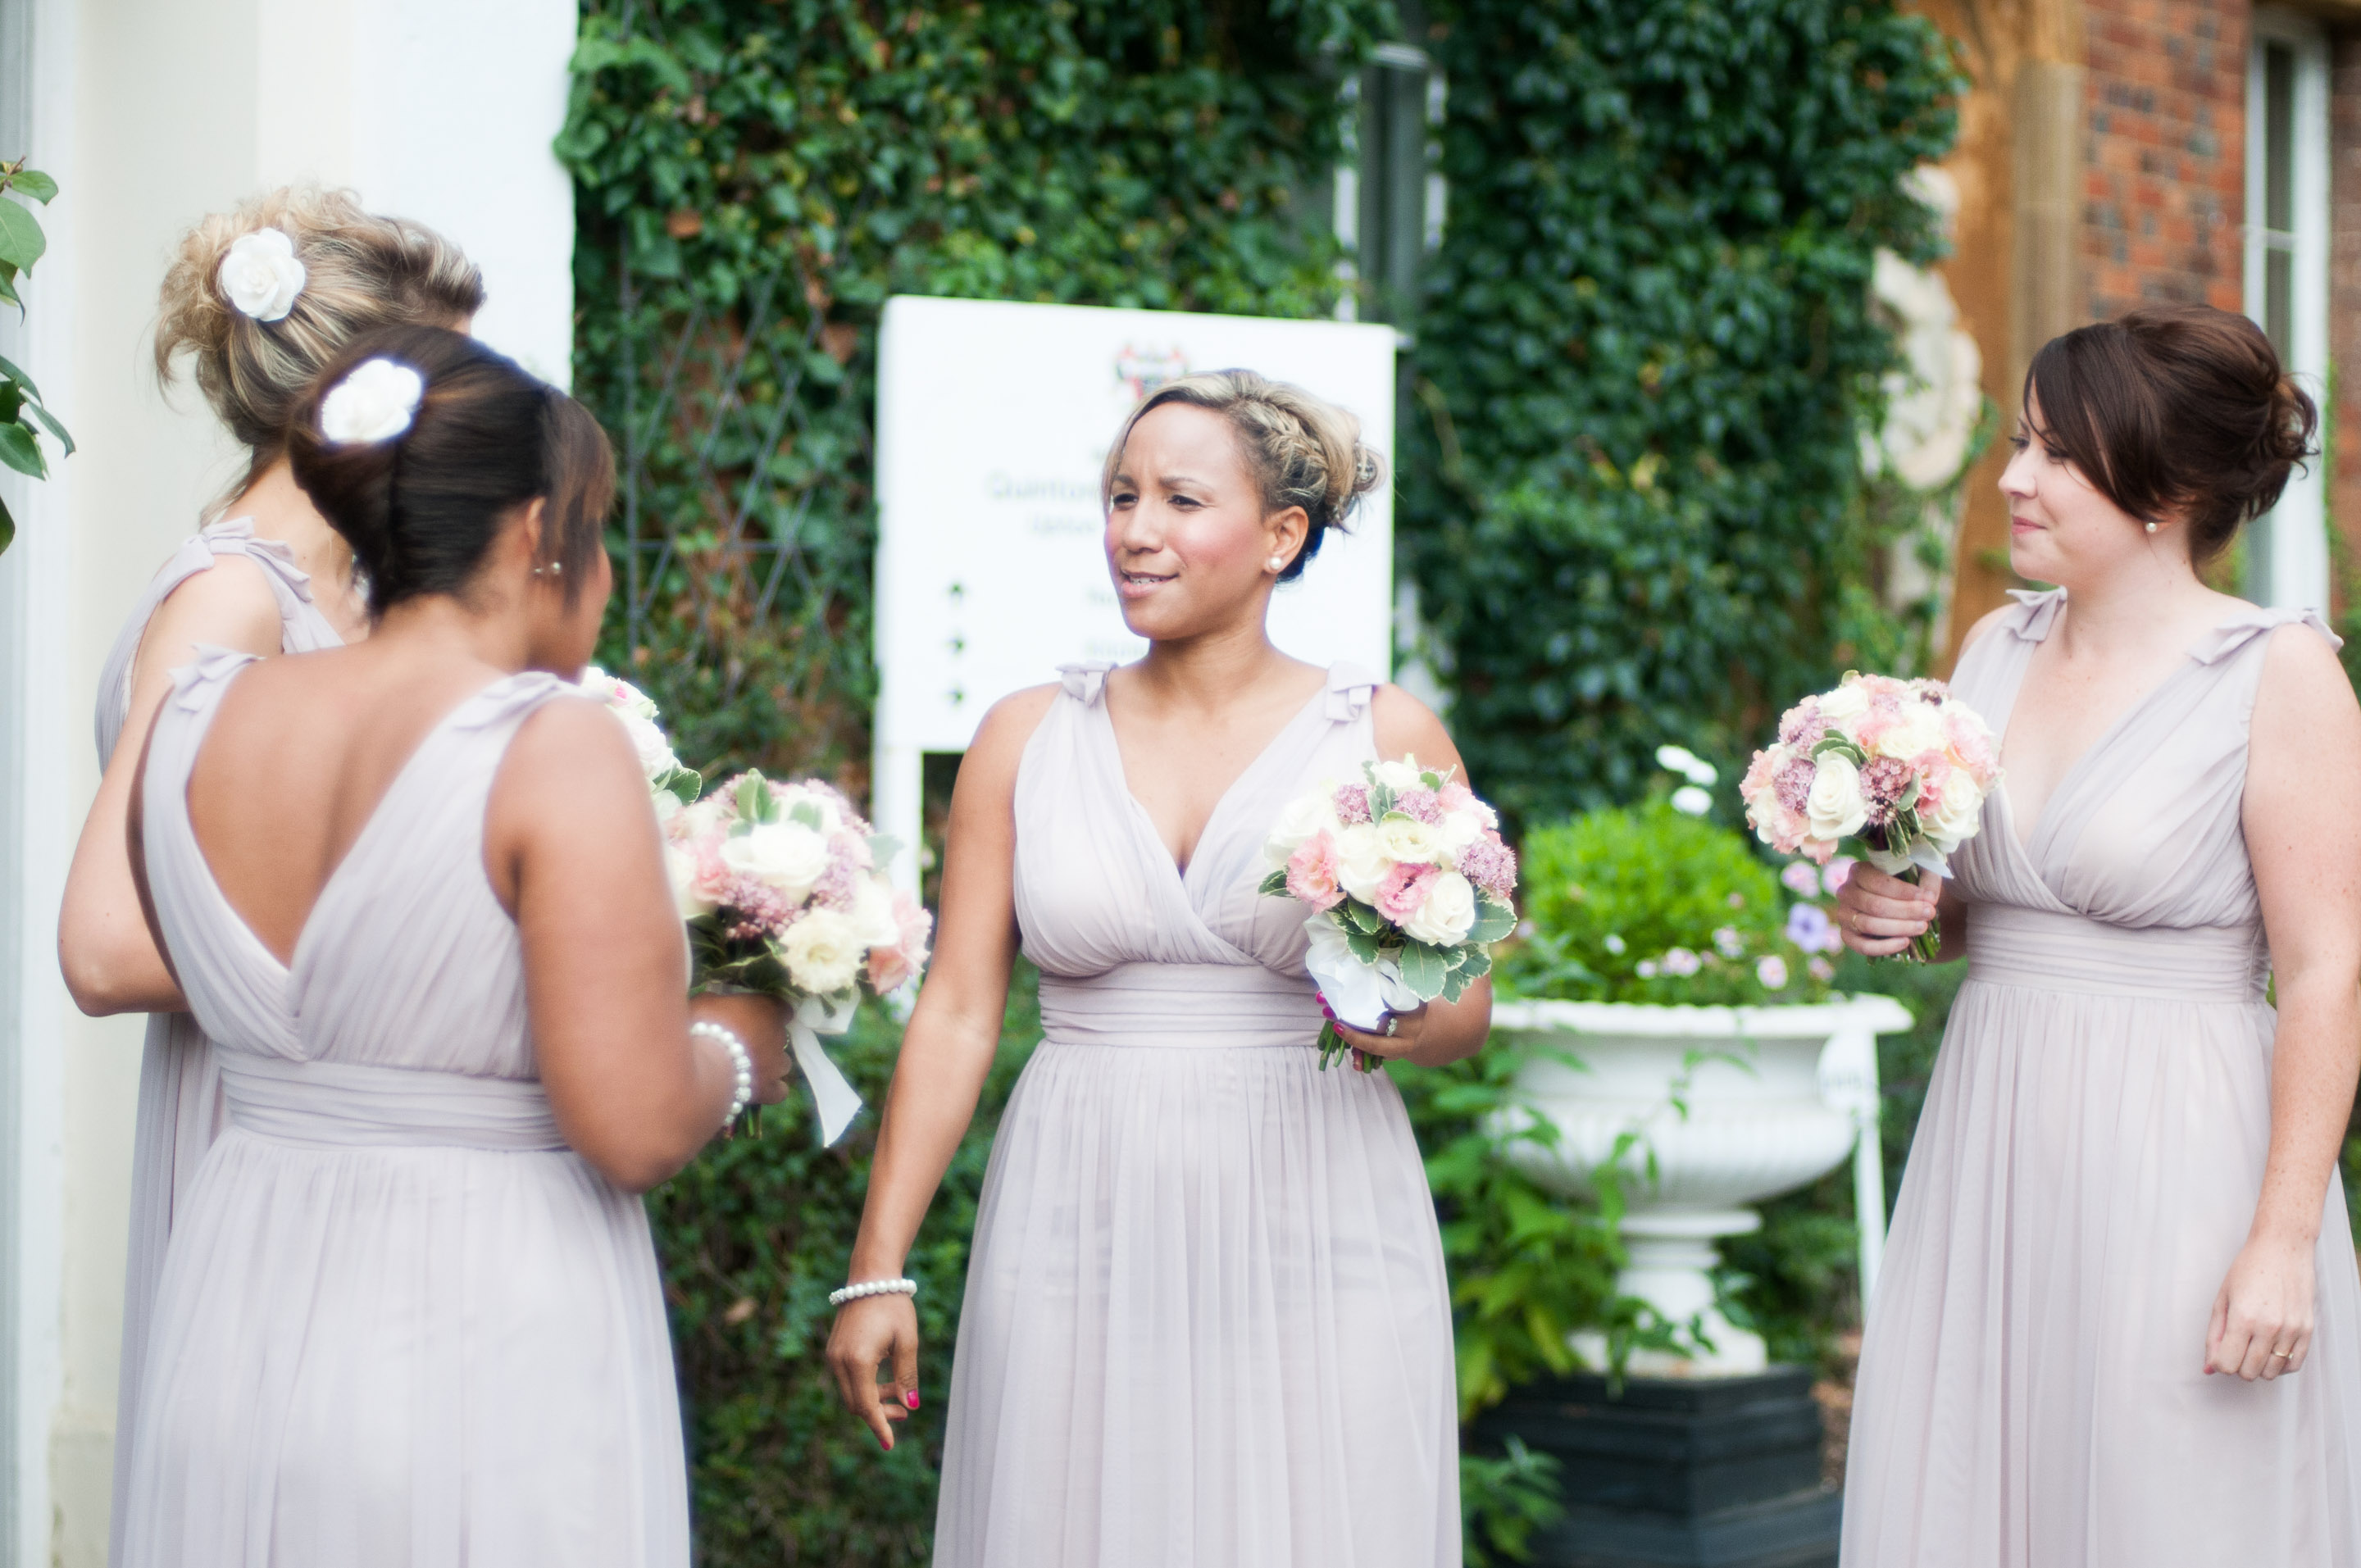 Bridesmaids and their flowers